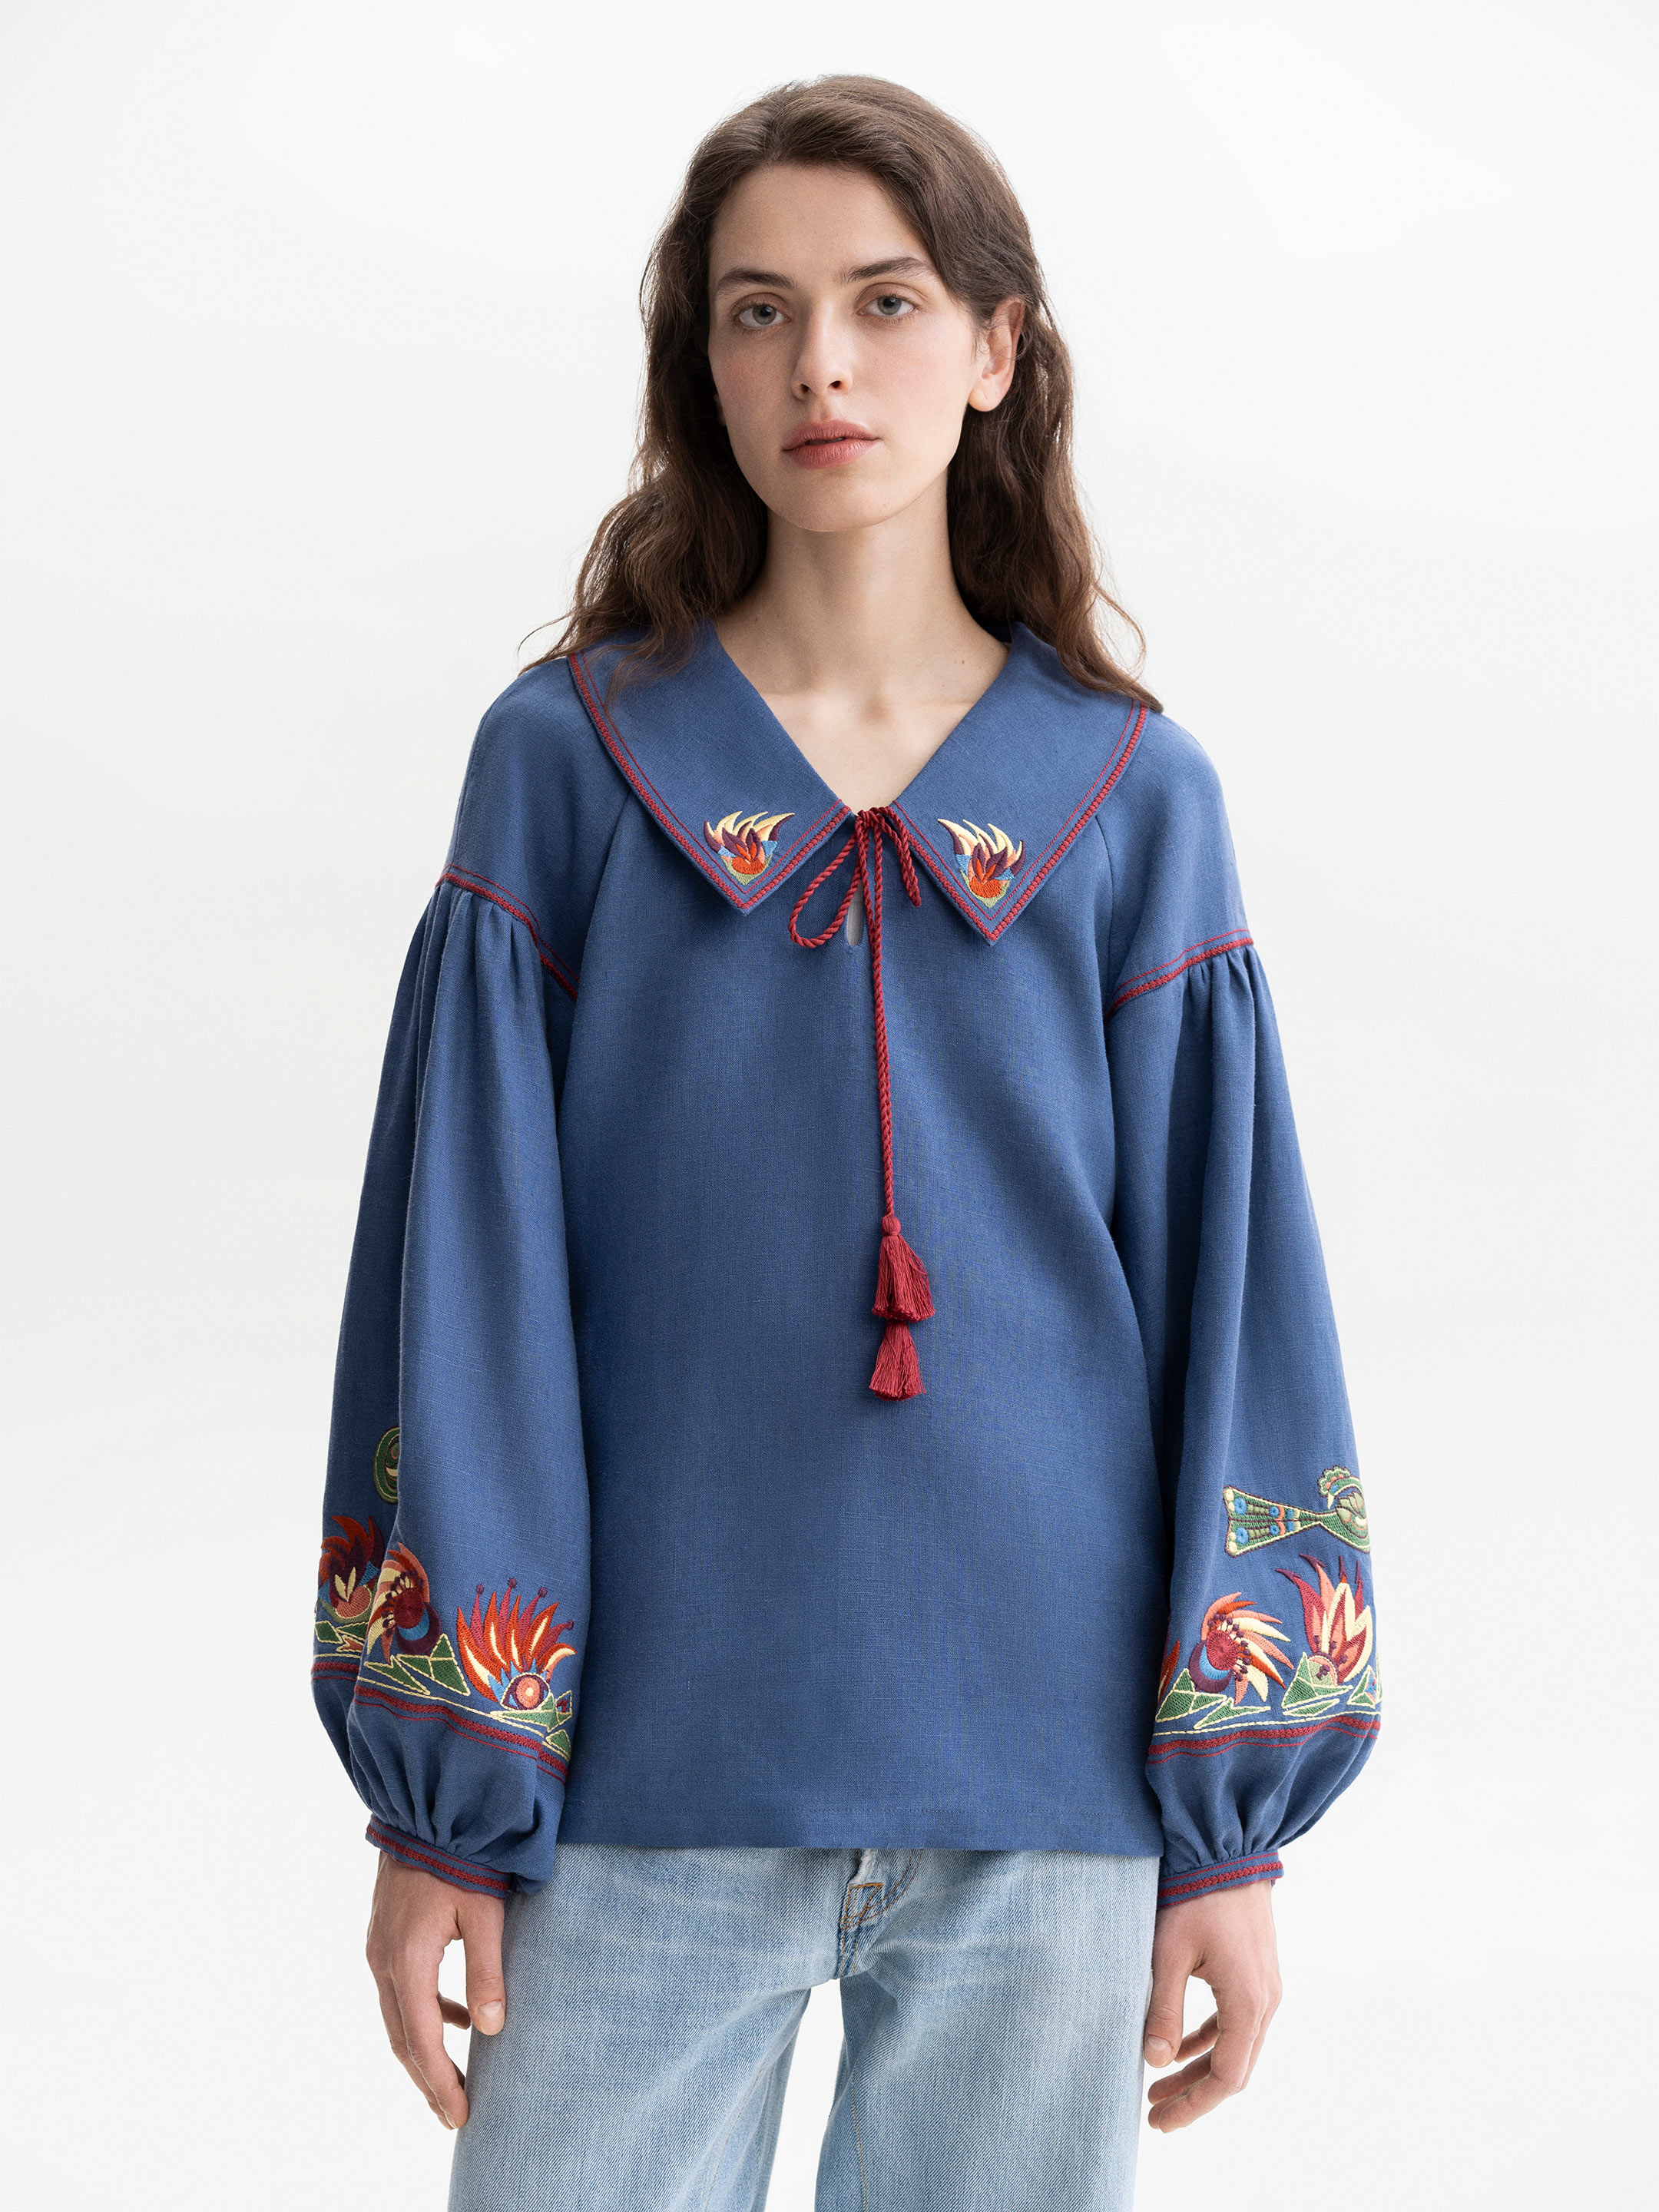 Blue embroidered women's jacket with colorful embroidery Mariupol - photo 1